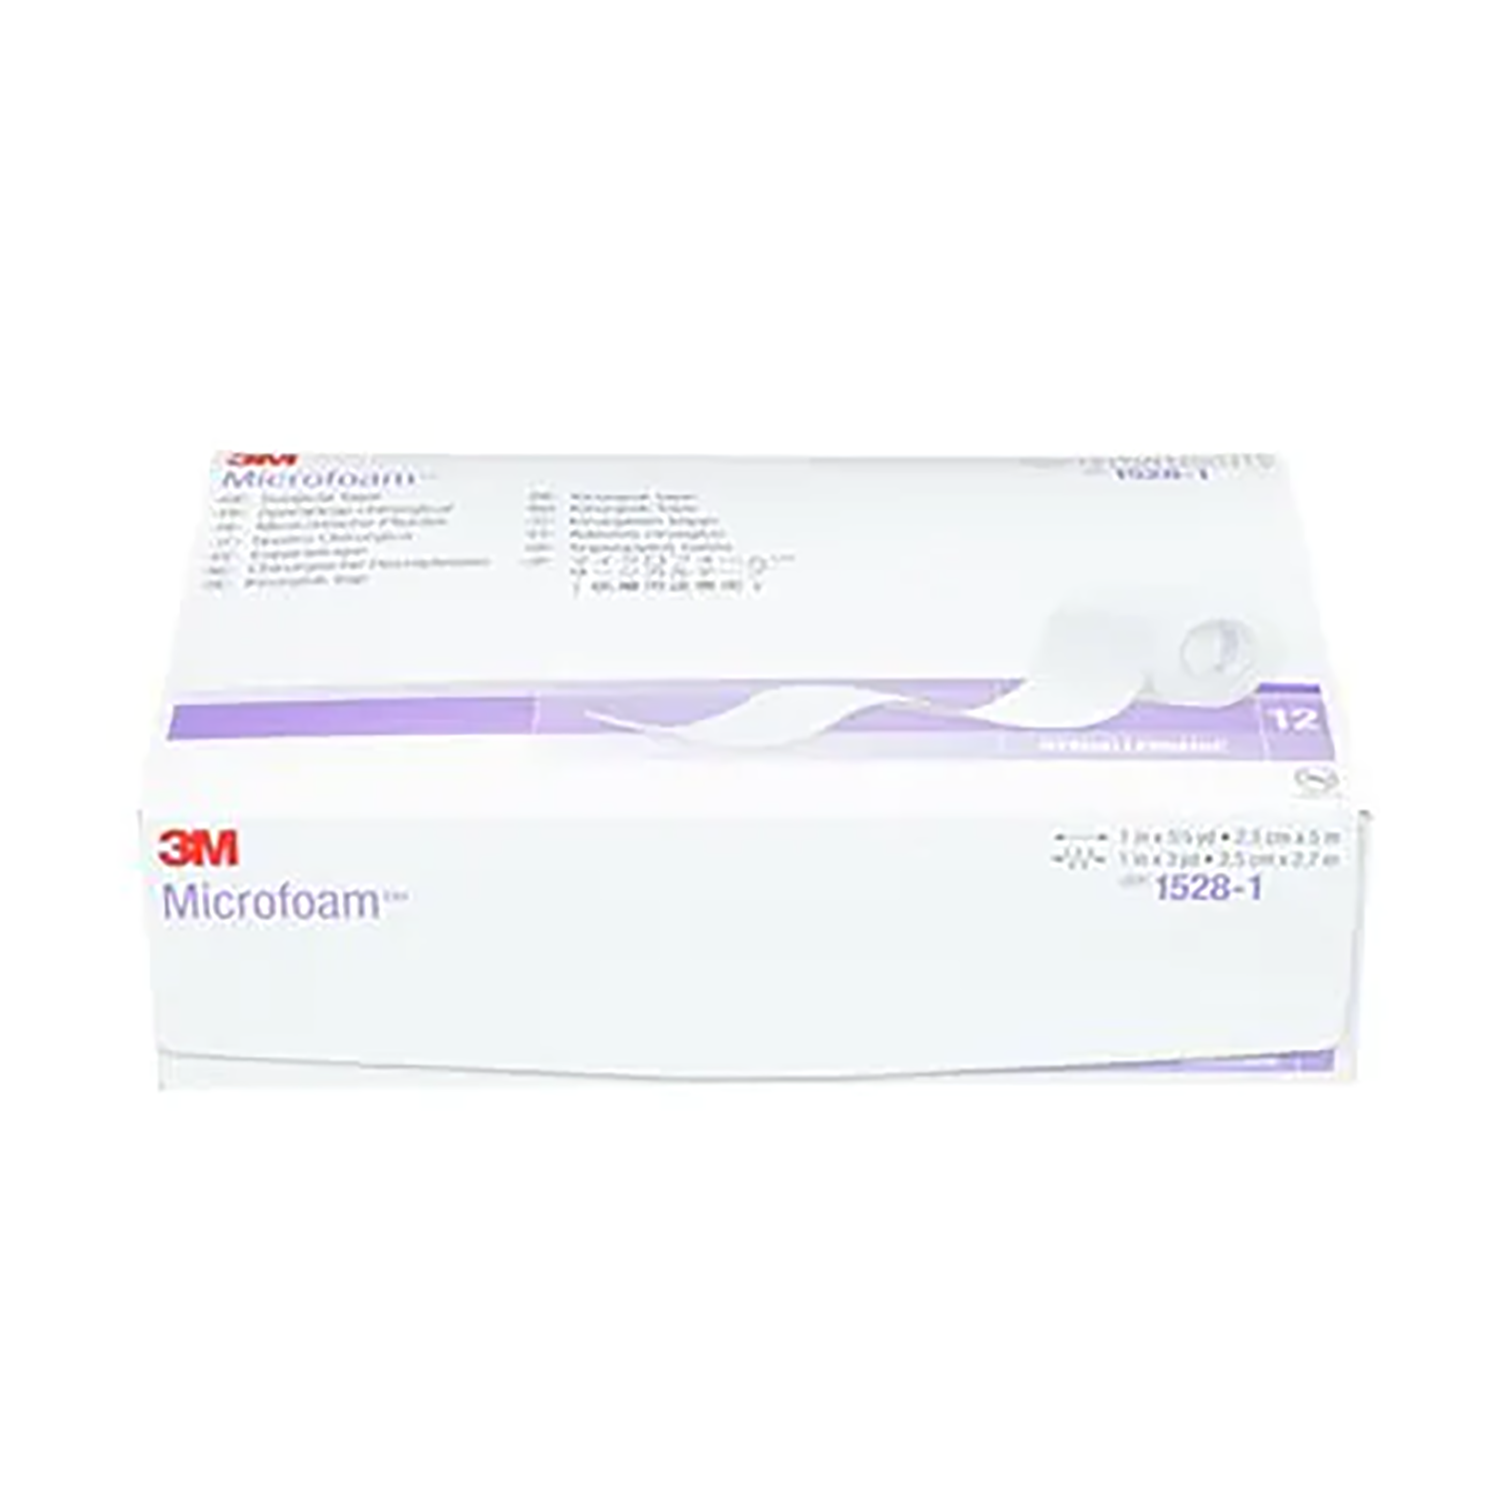 3M Microfoam Surgical Tape | 2.5cm x 5m | Pack of 12 (1)